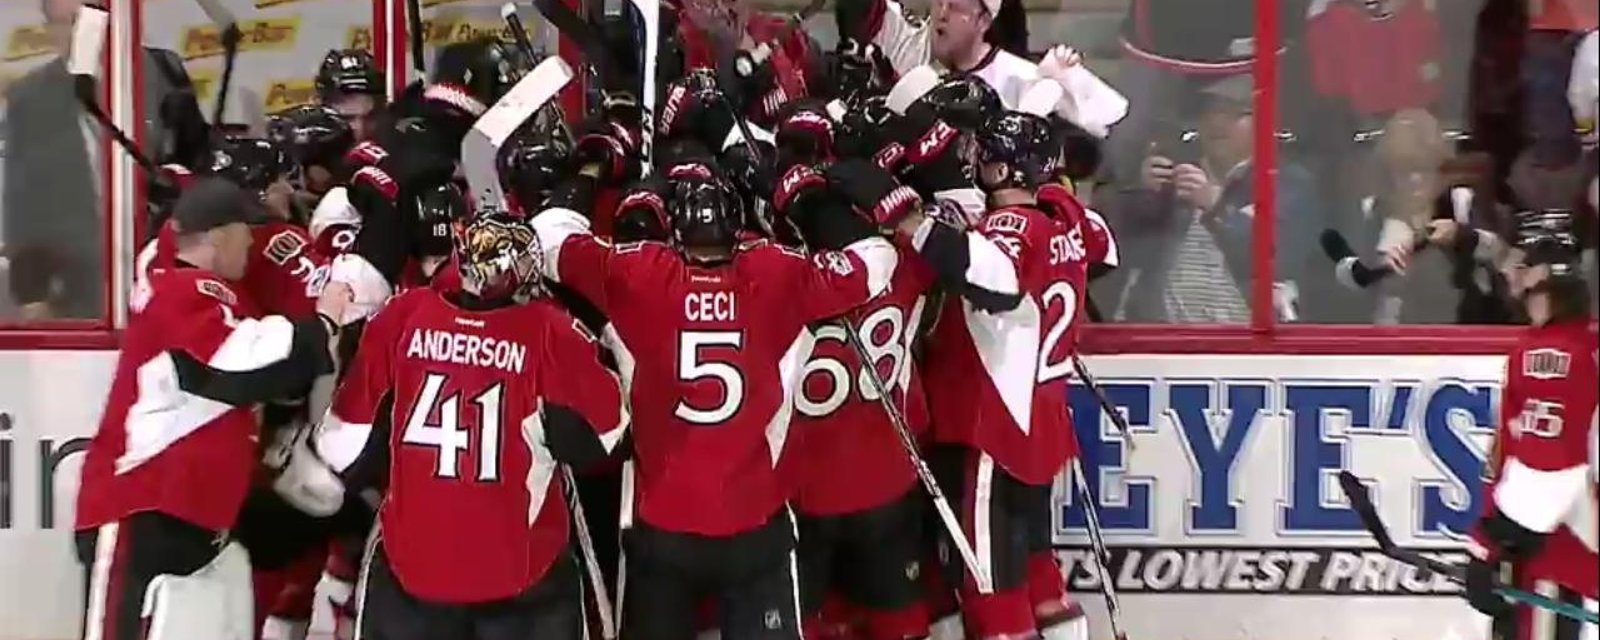 Ottawa wins it dramatically in overtime! 